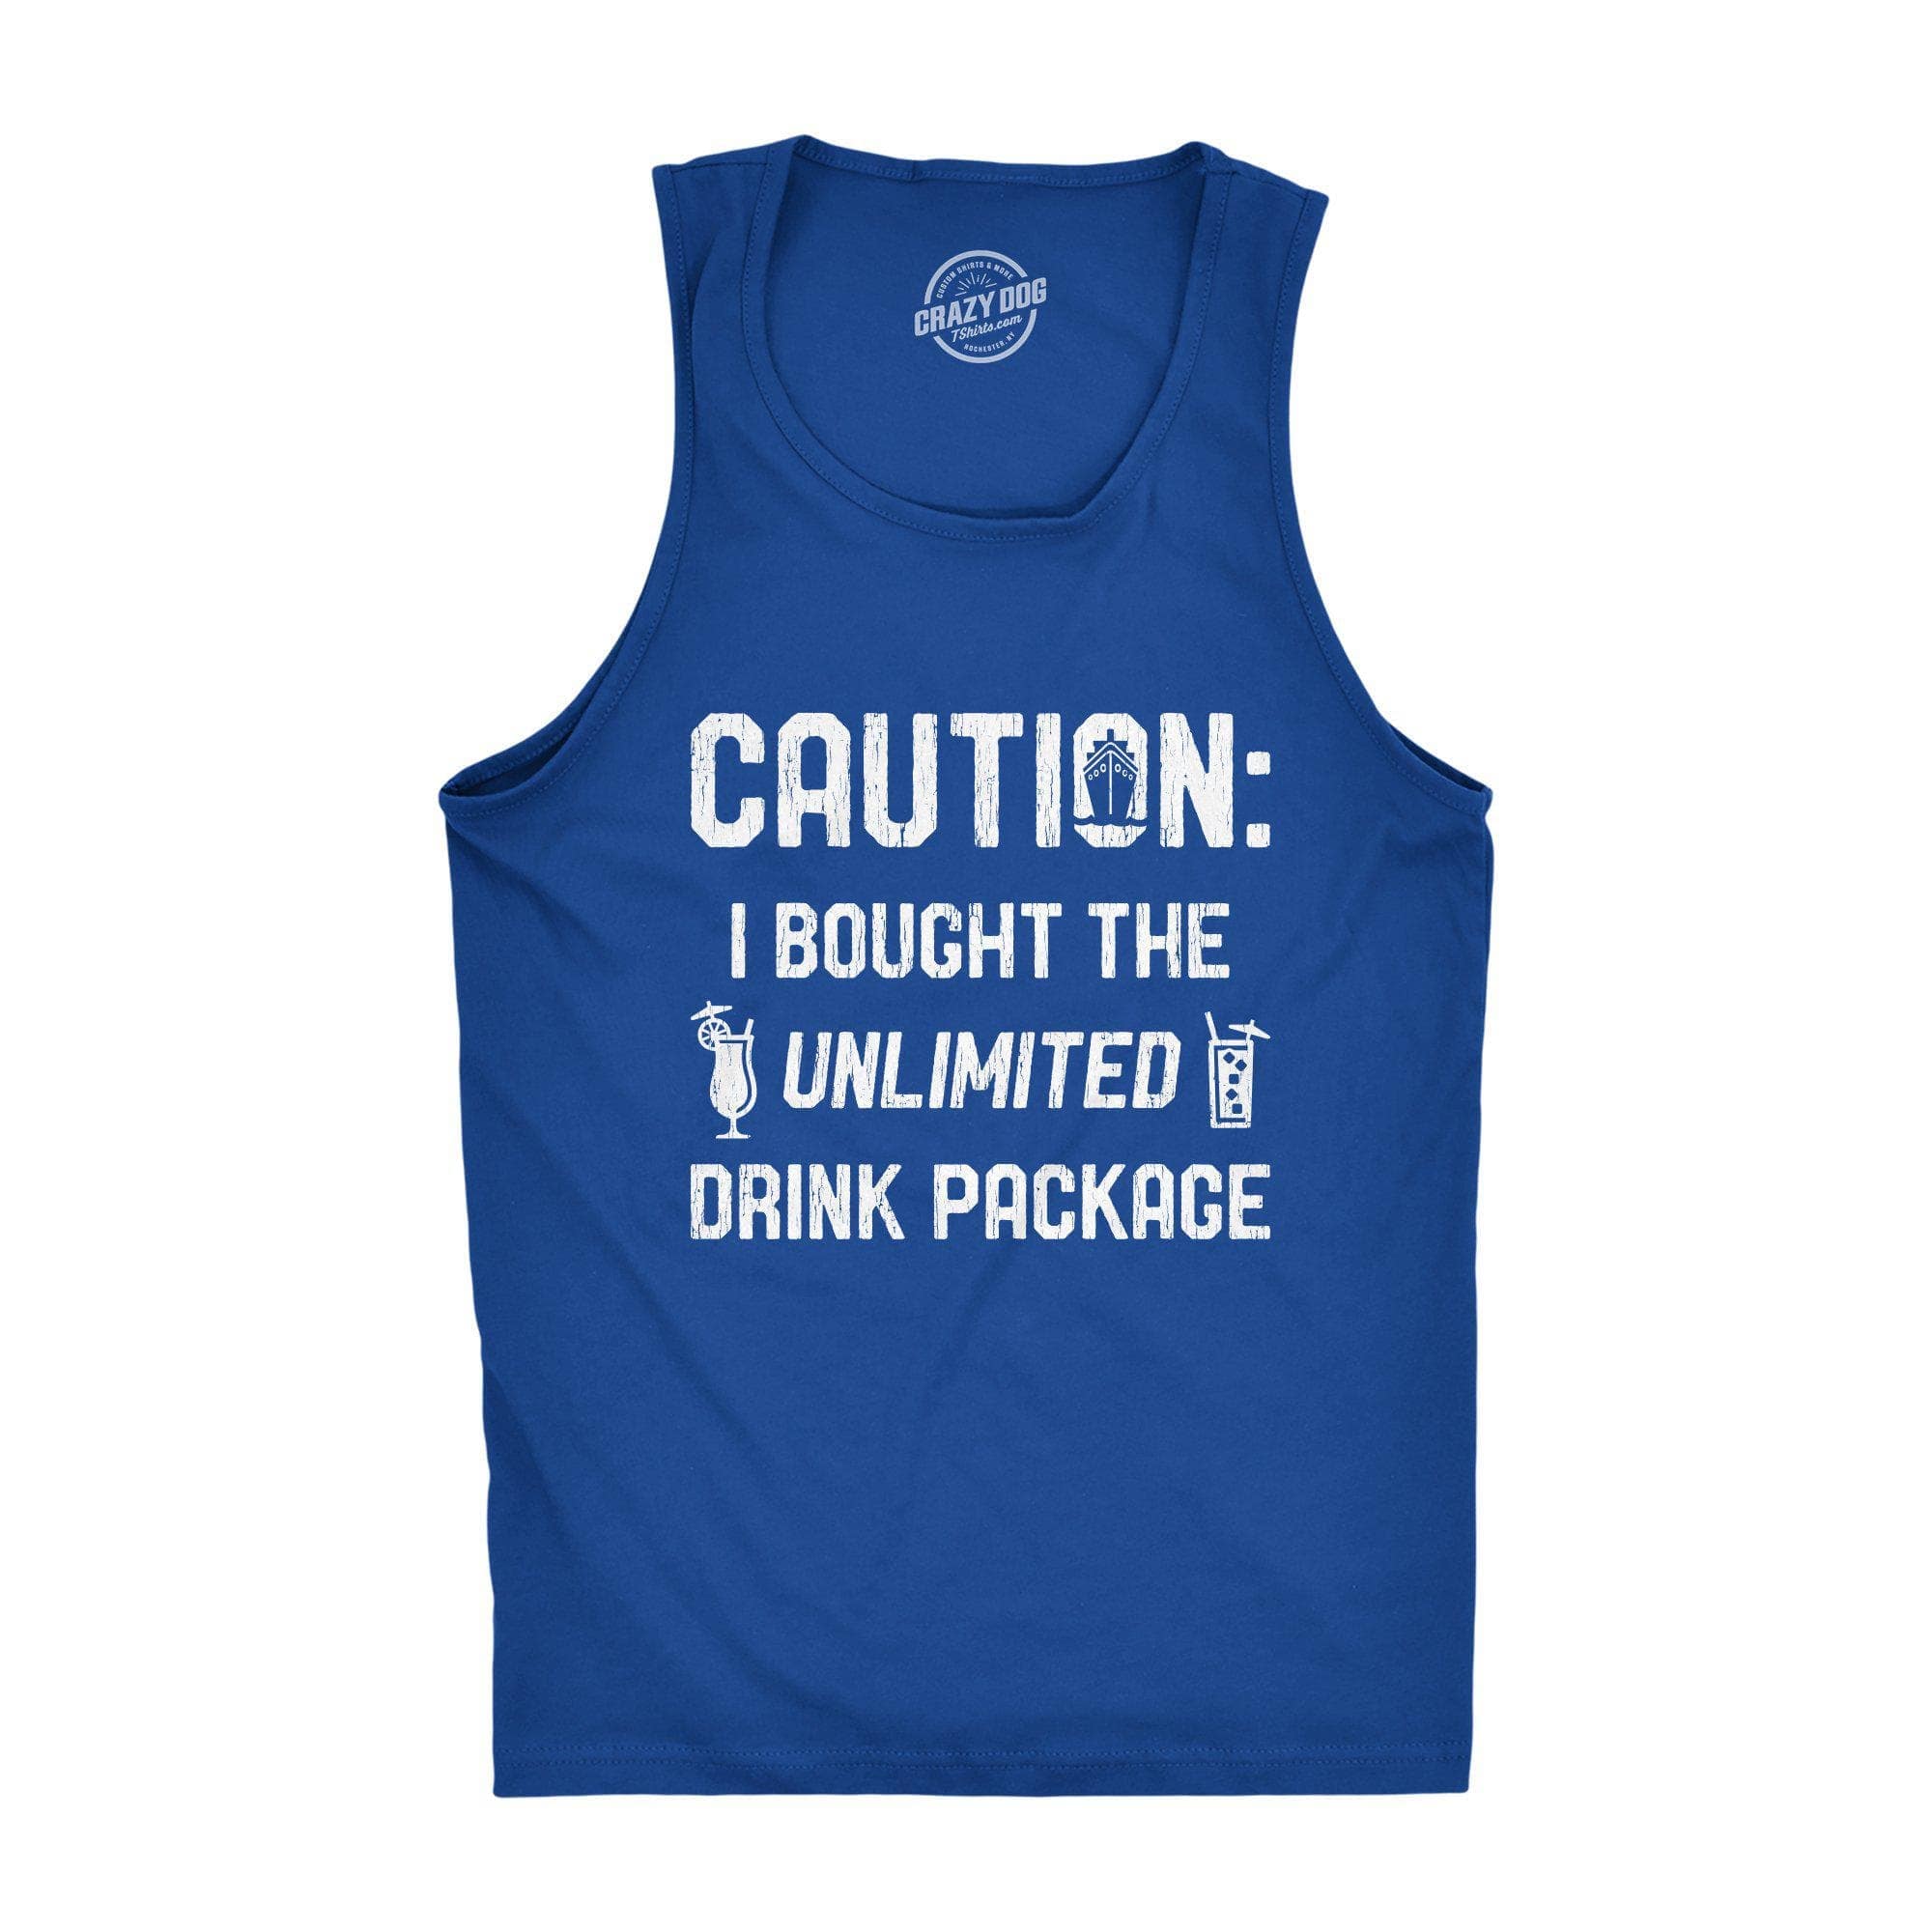 Caution I Bought The Unlimited Drink Package Men's Tank Top - Crazy Dog T-Shirts